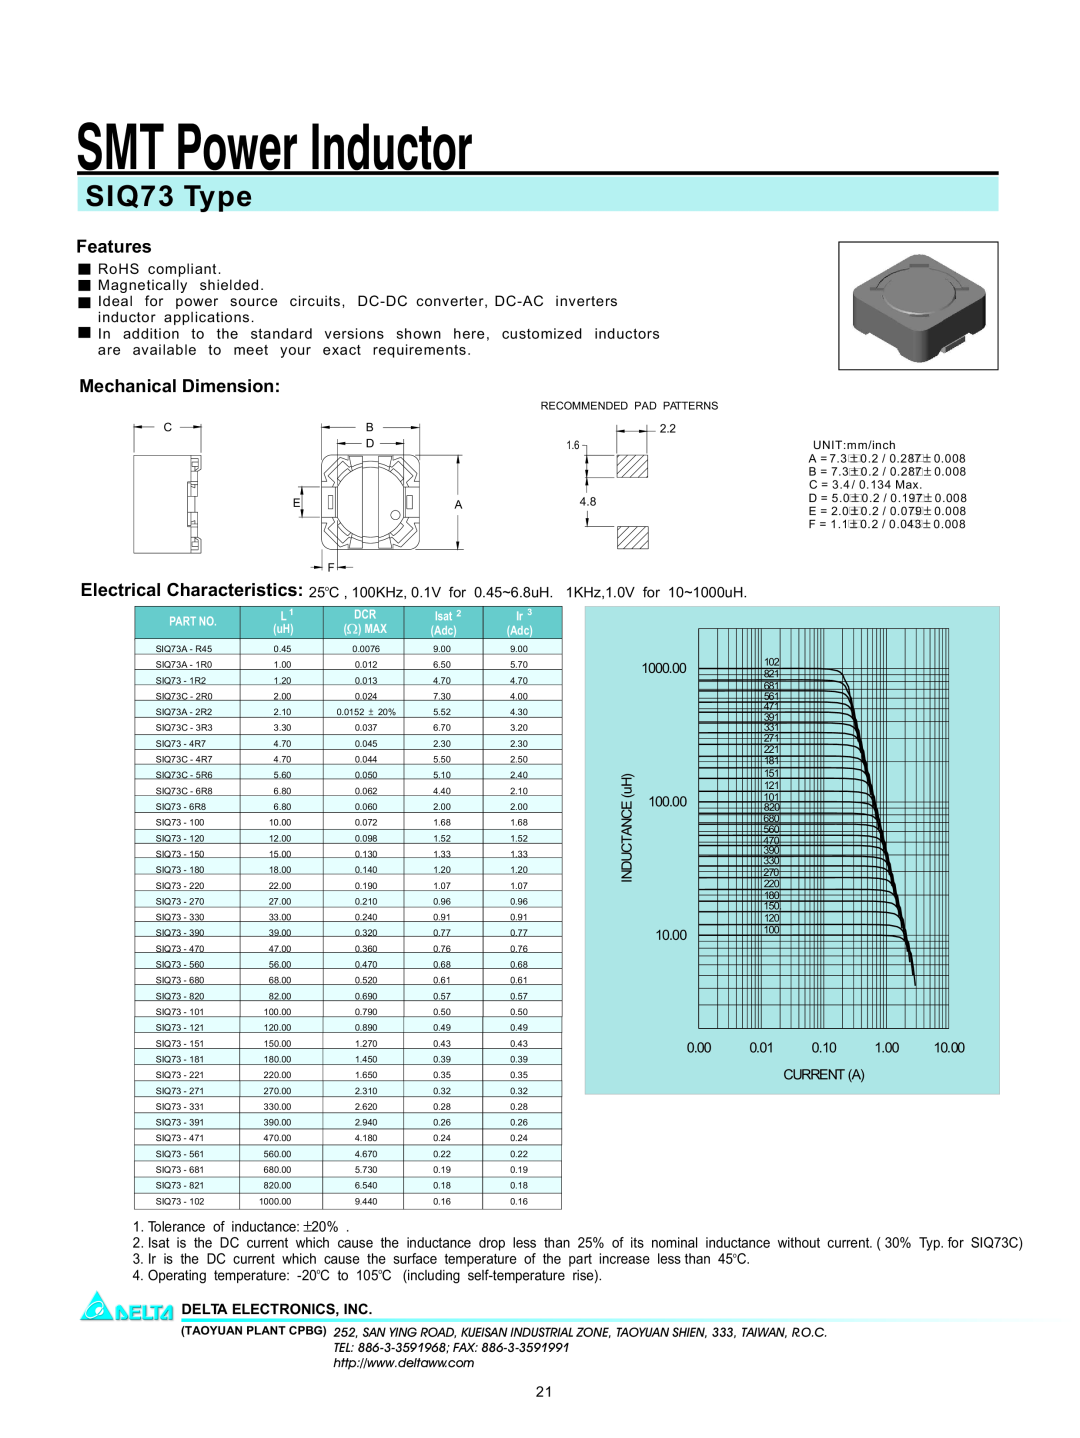 Delta Electronics manual SMT Power Inductor, SIQ73 Type, Features, Mechanical Dimension, Delta Electronics, Inc 